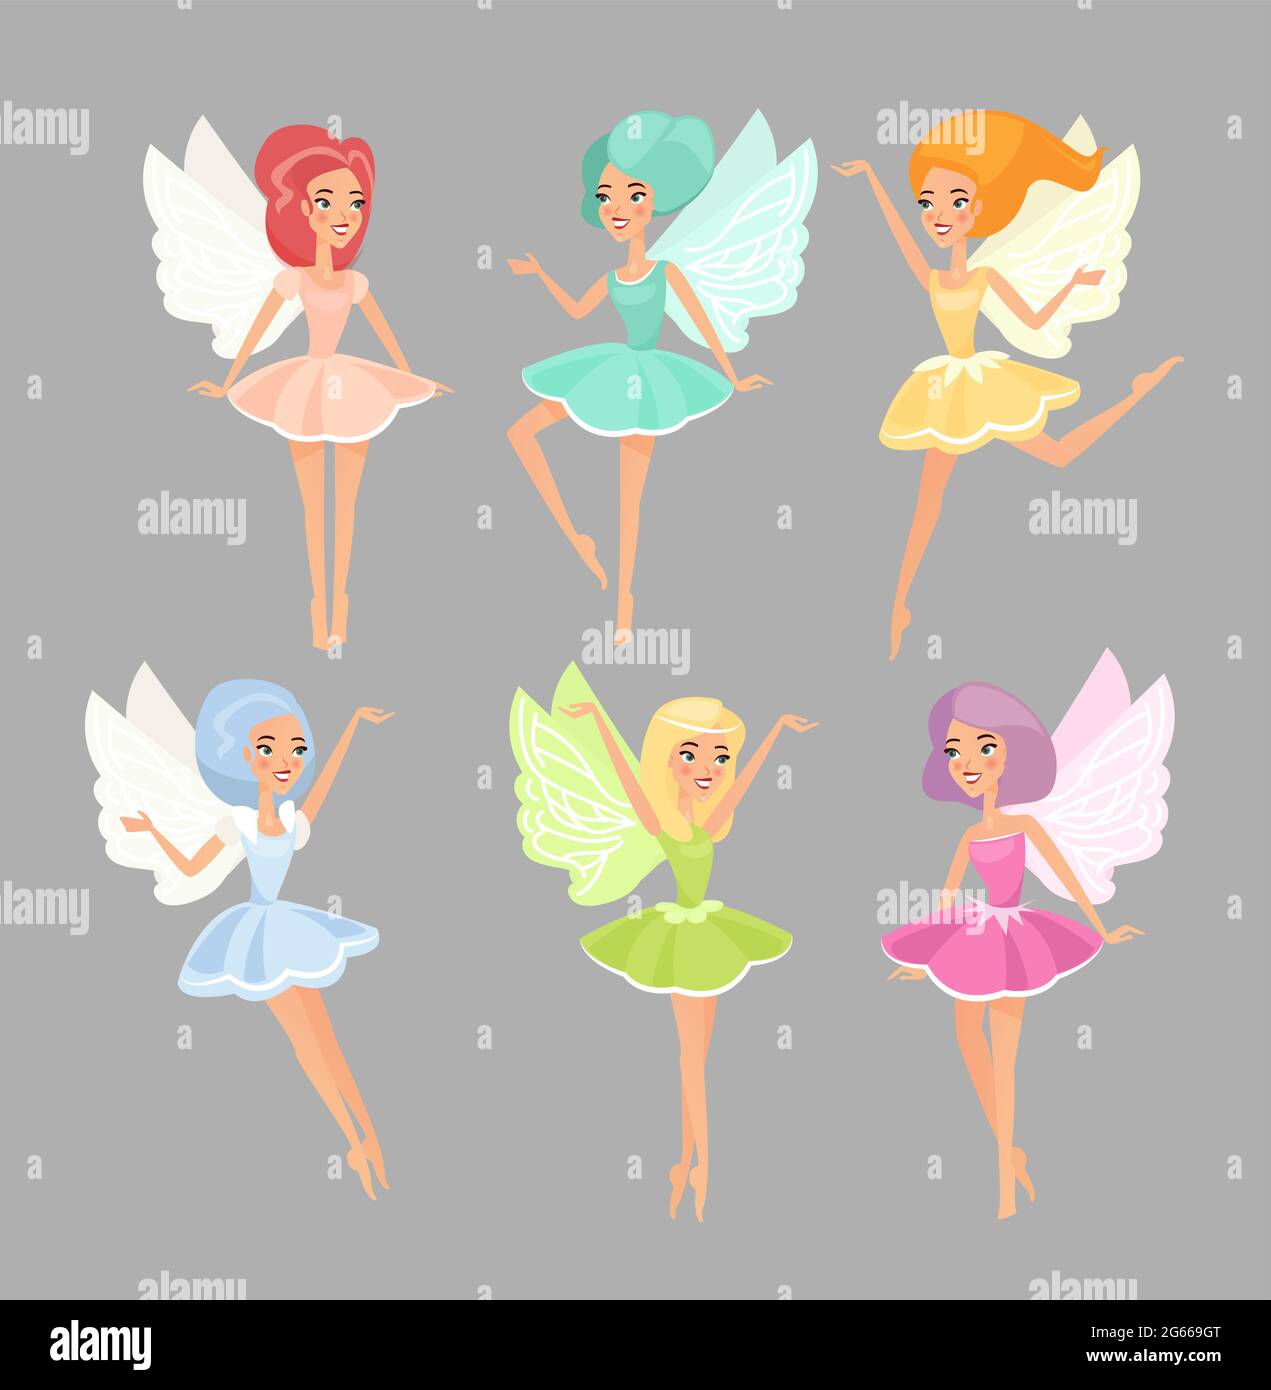 Fairies flat vector illustrations set. Magic fairytale creatures isolated on grey background. Cute mythical flying elves cartoon characters. Colorful Stock Vector